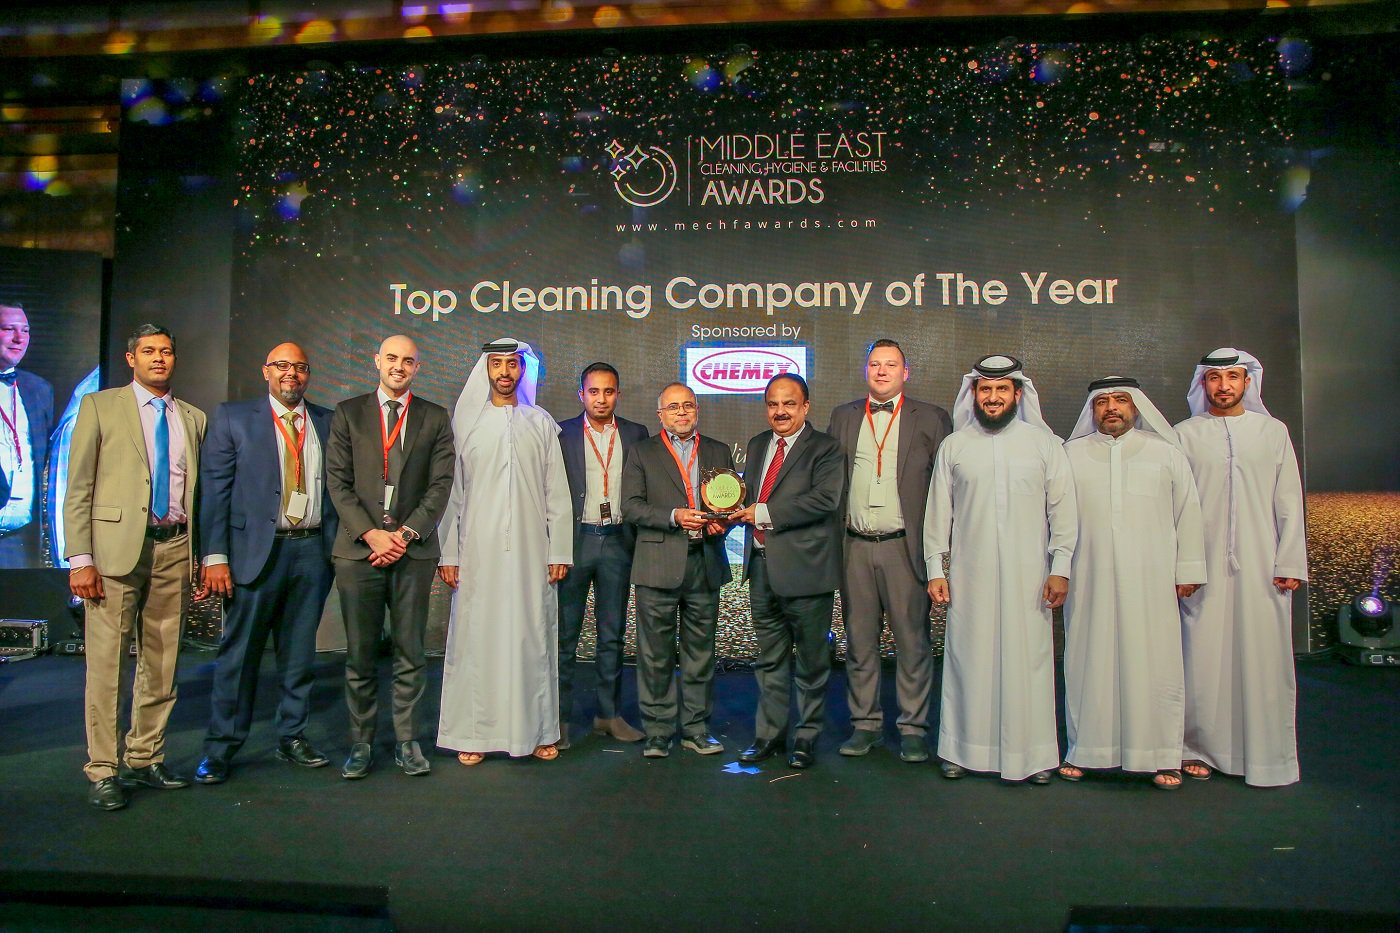 Isnaad crowned ‘Top Cleaning Company of the Year’ at Middle East cleaning, hygiene & facilities awards